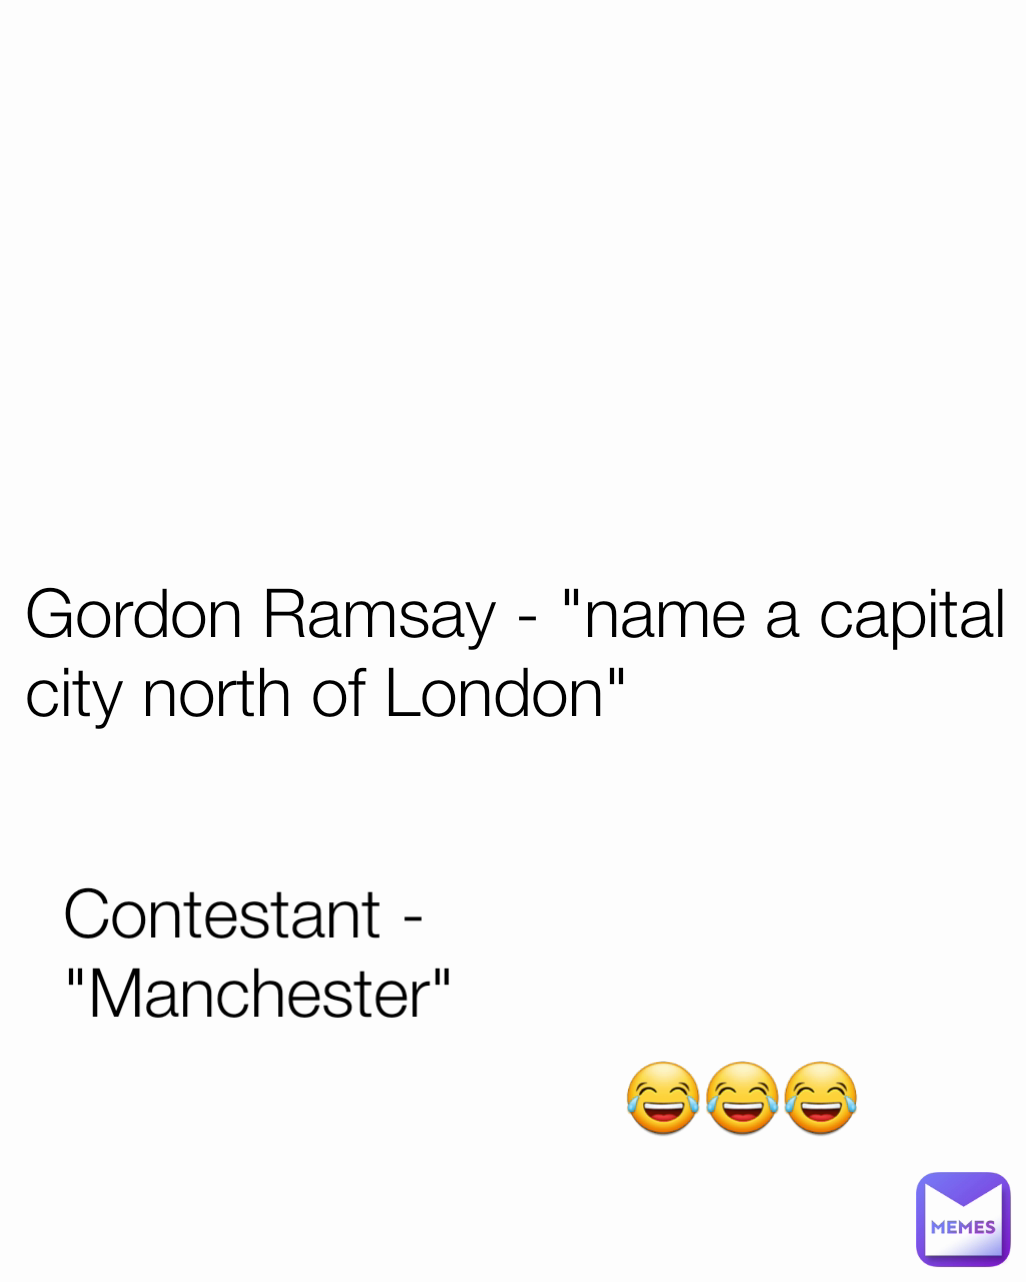 Contestant - "Manchester"  😂😂😂 Gordon Ramsay - "name a capital city north of London" 